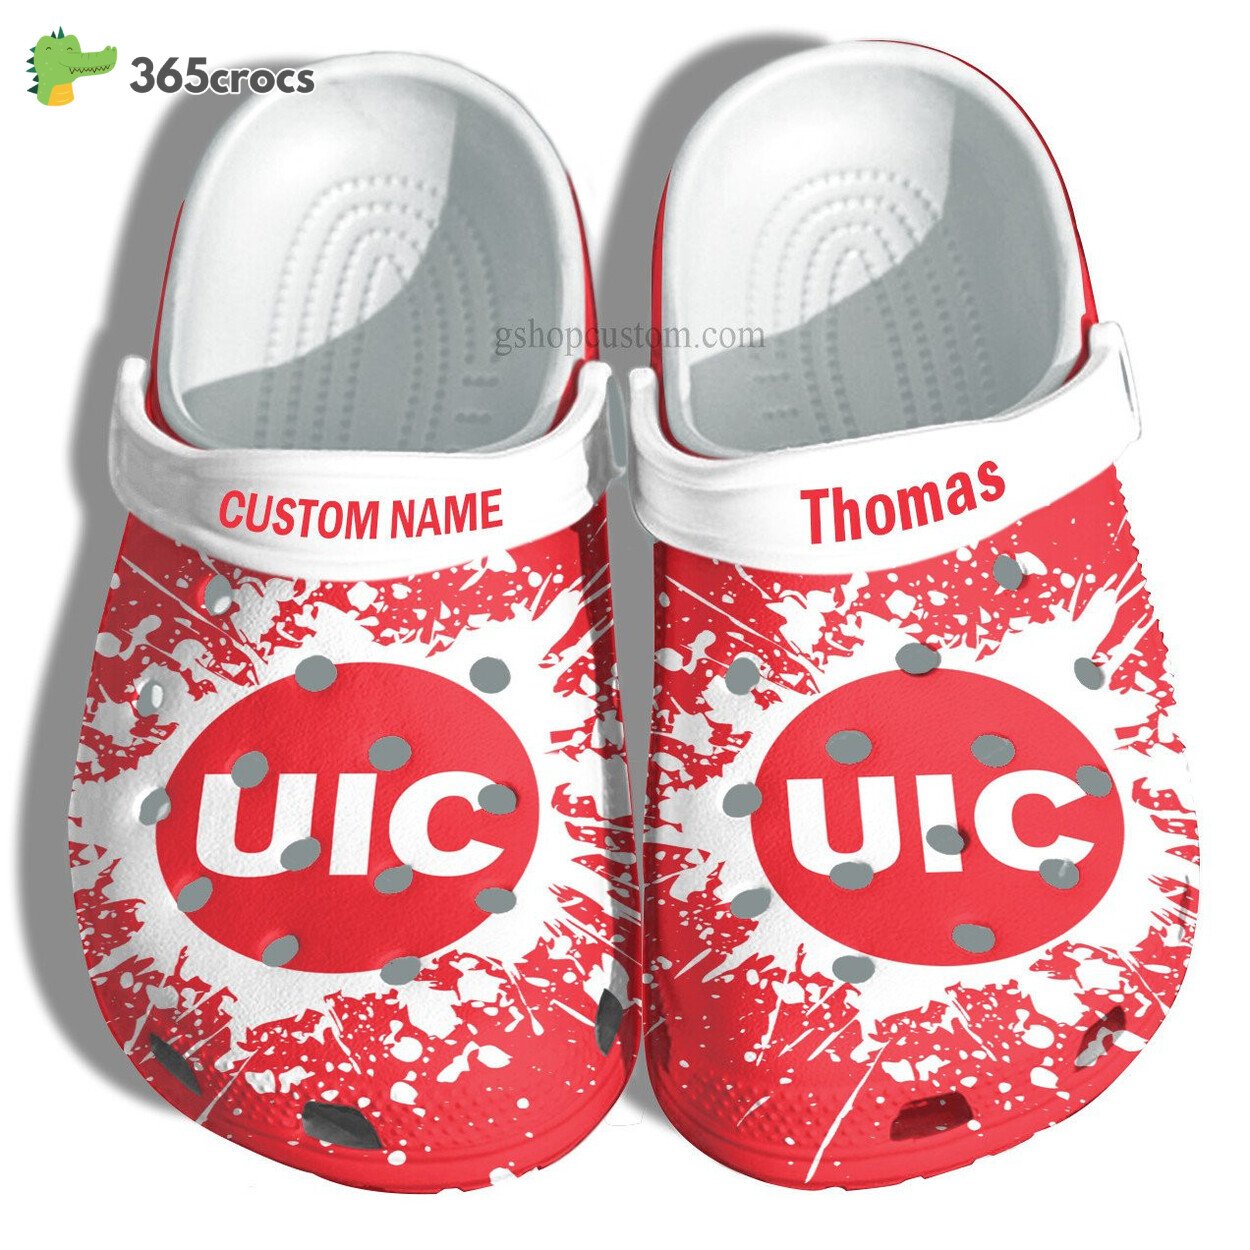 University Of Illinois At Chicago Graduation Gifts Croc Shoes Customize Admission Gift Shoes